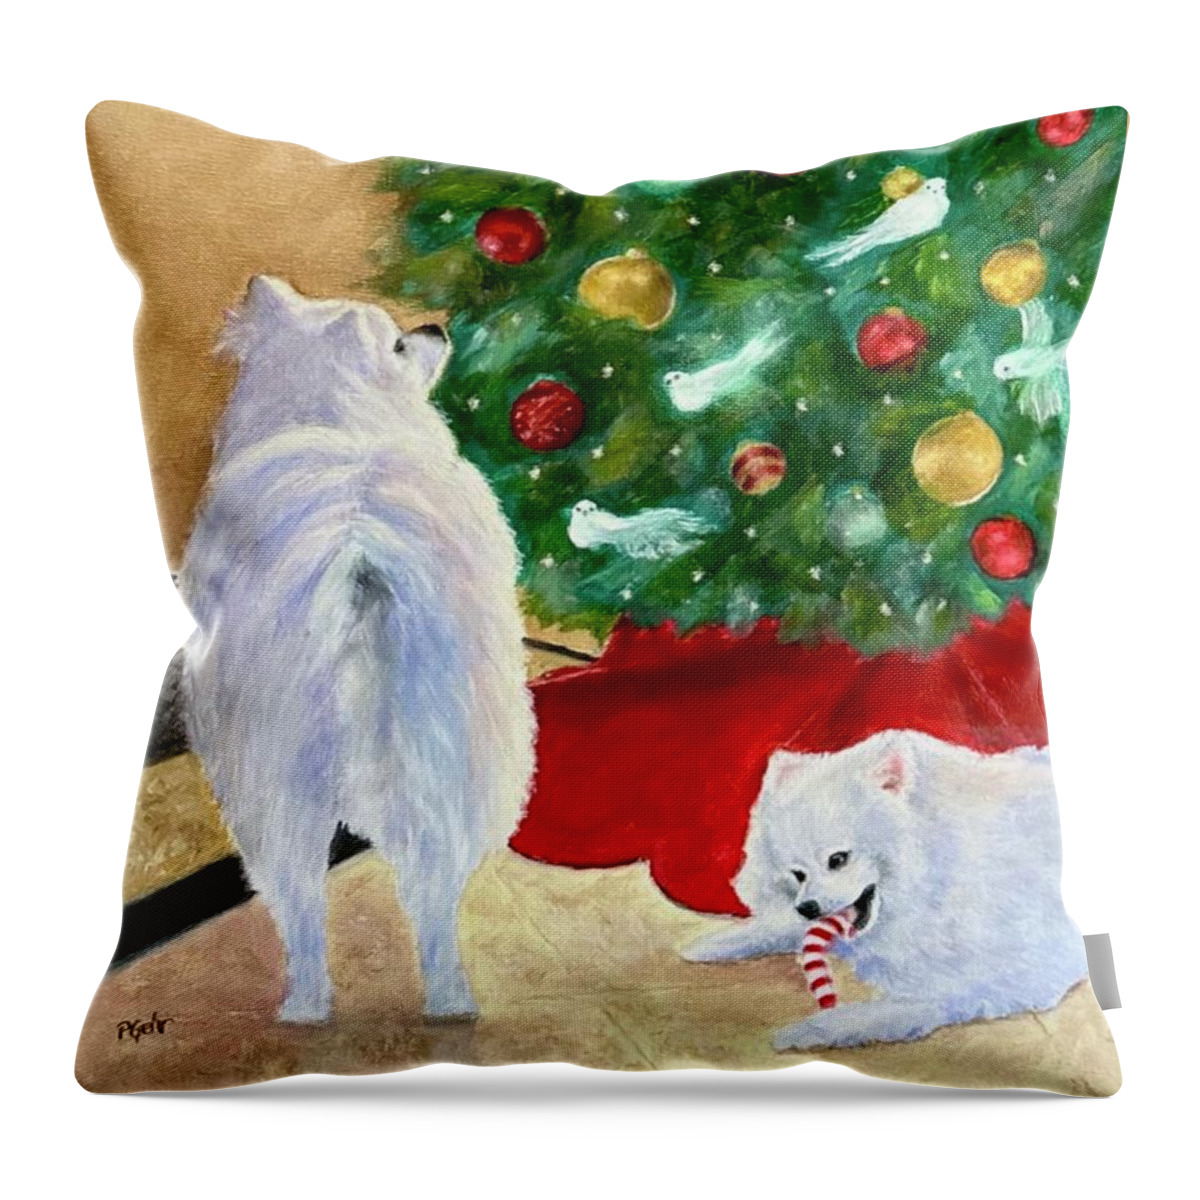 Christmas Throw Pillow featuring the painting Mini Merriment by Dr Pat Gehr